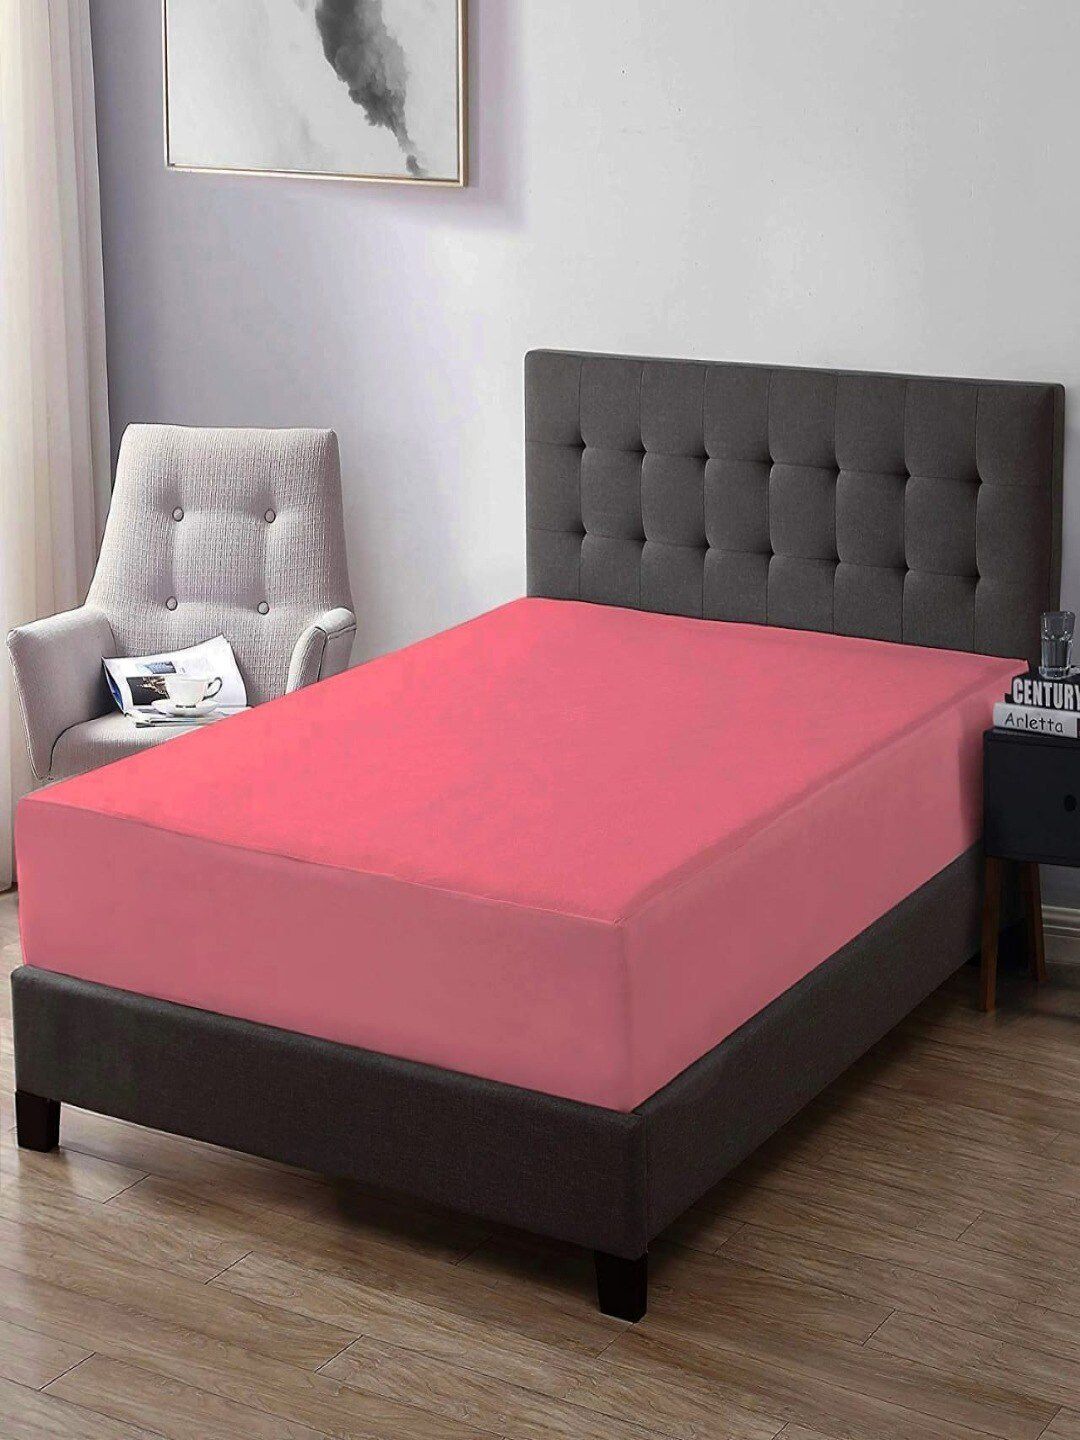 Trance Home Linen Coral King Size Fitted Cotton Waterproof Mattress Protector Price in India